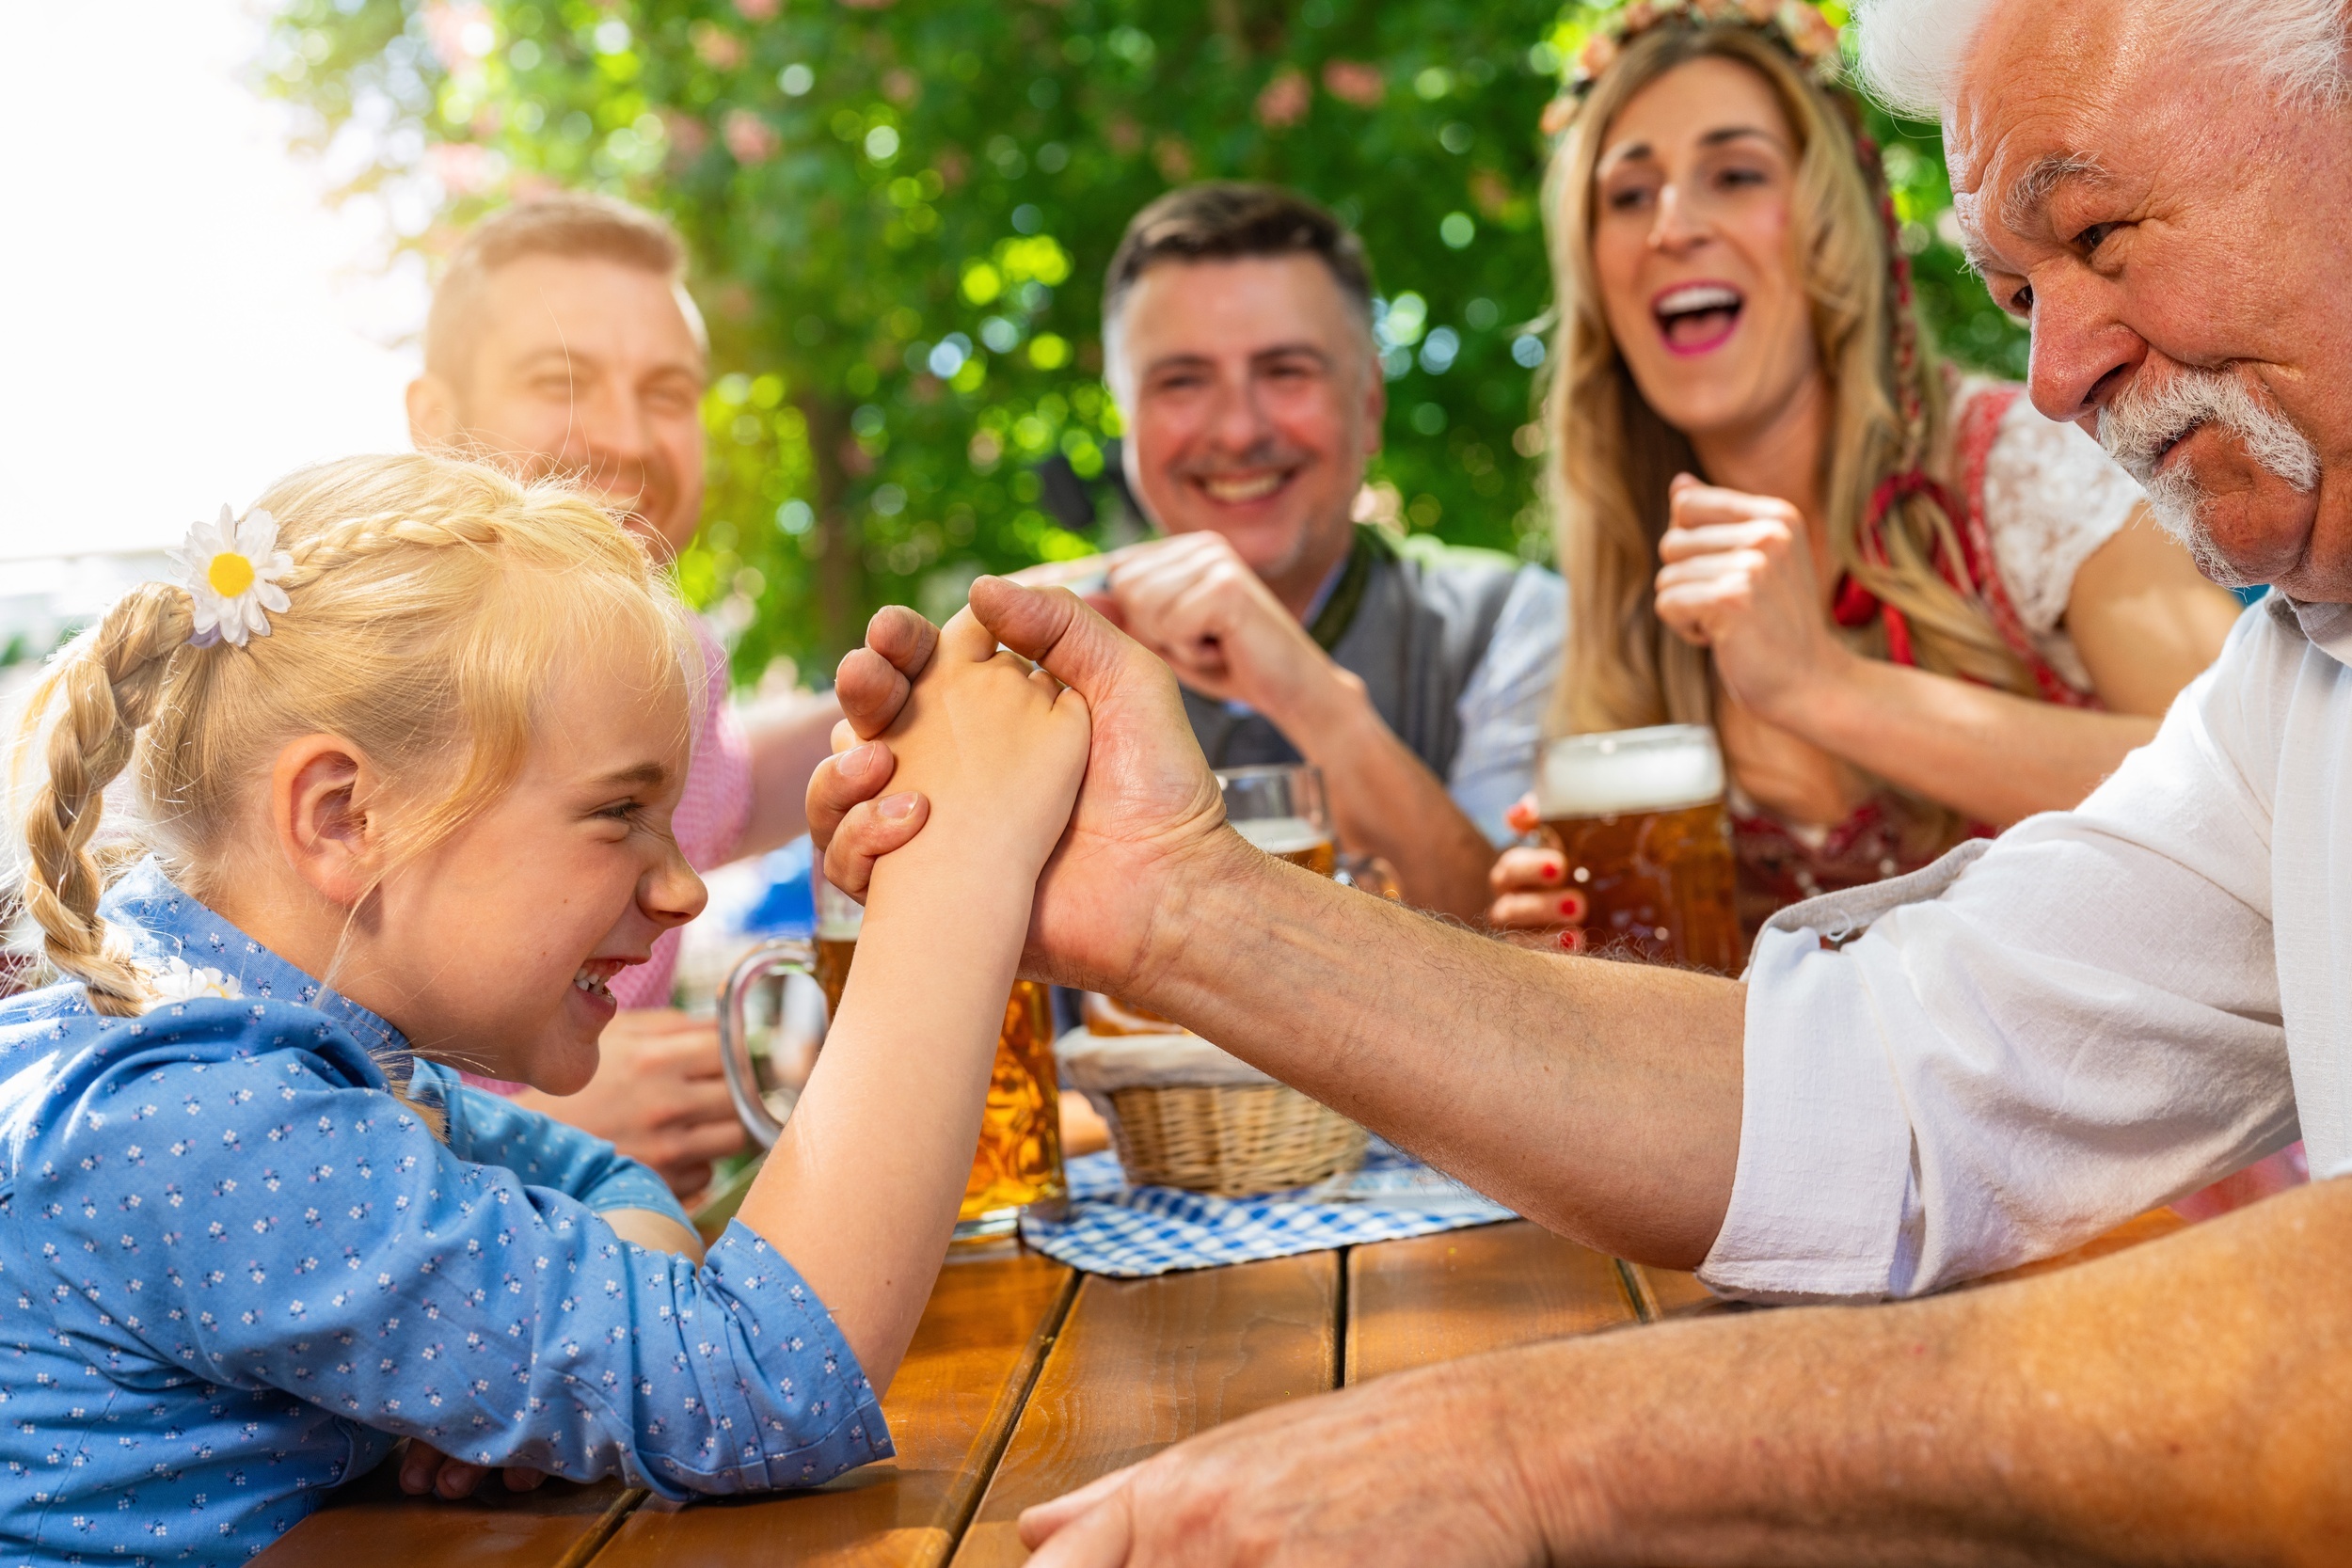 <p>Many bars on the continent welcome kids — up to a certain hour, anyway. Thus, it’s pretty common to see parents having a drink and their kids enjoying hot chocolate or juice, especially at pubs.</p><p>You may also like: <a href='https://www.yardbarker.com/lifestyle/articles/20_signs_that_youre_obviously_an_american_abroad_021324/s1__39017233'>20 signs that you’re obviously an American abroad</a></p>